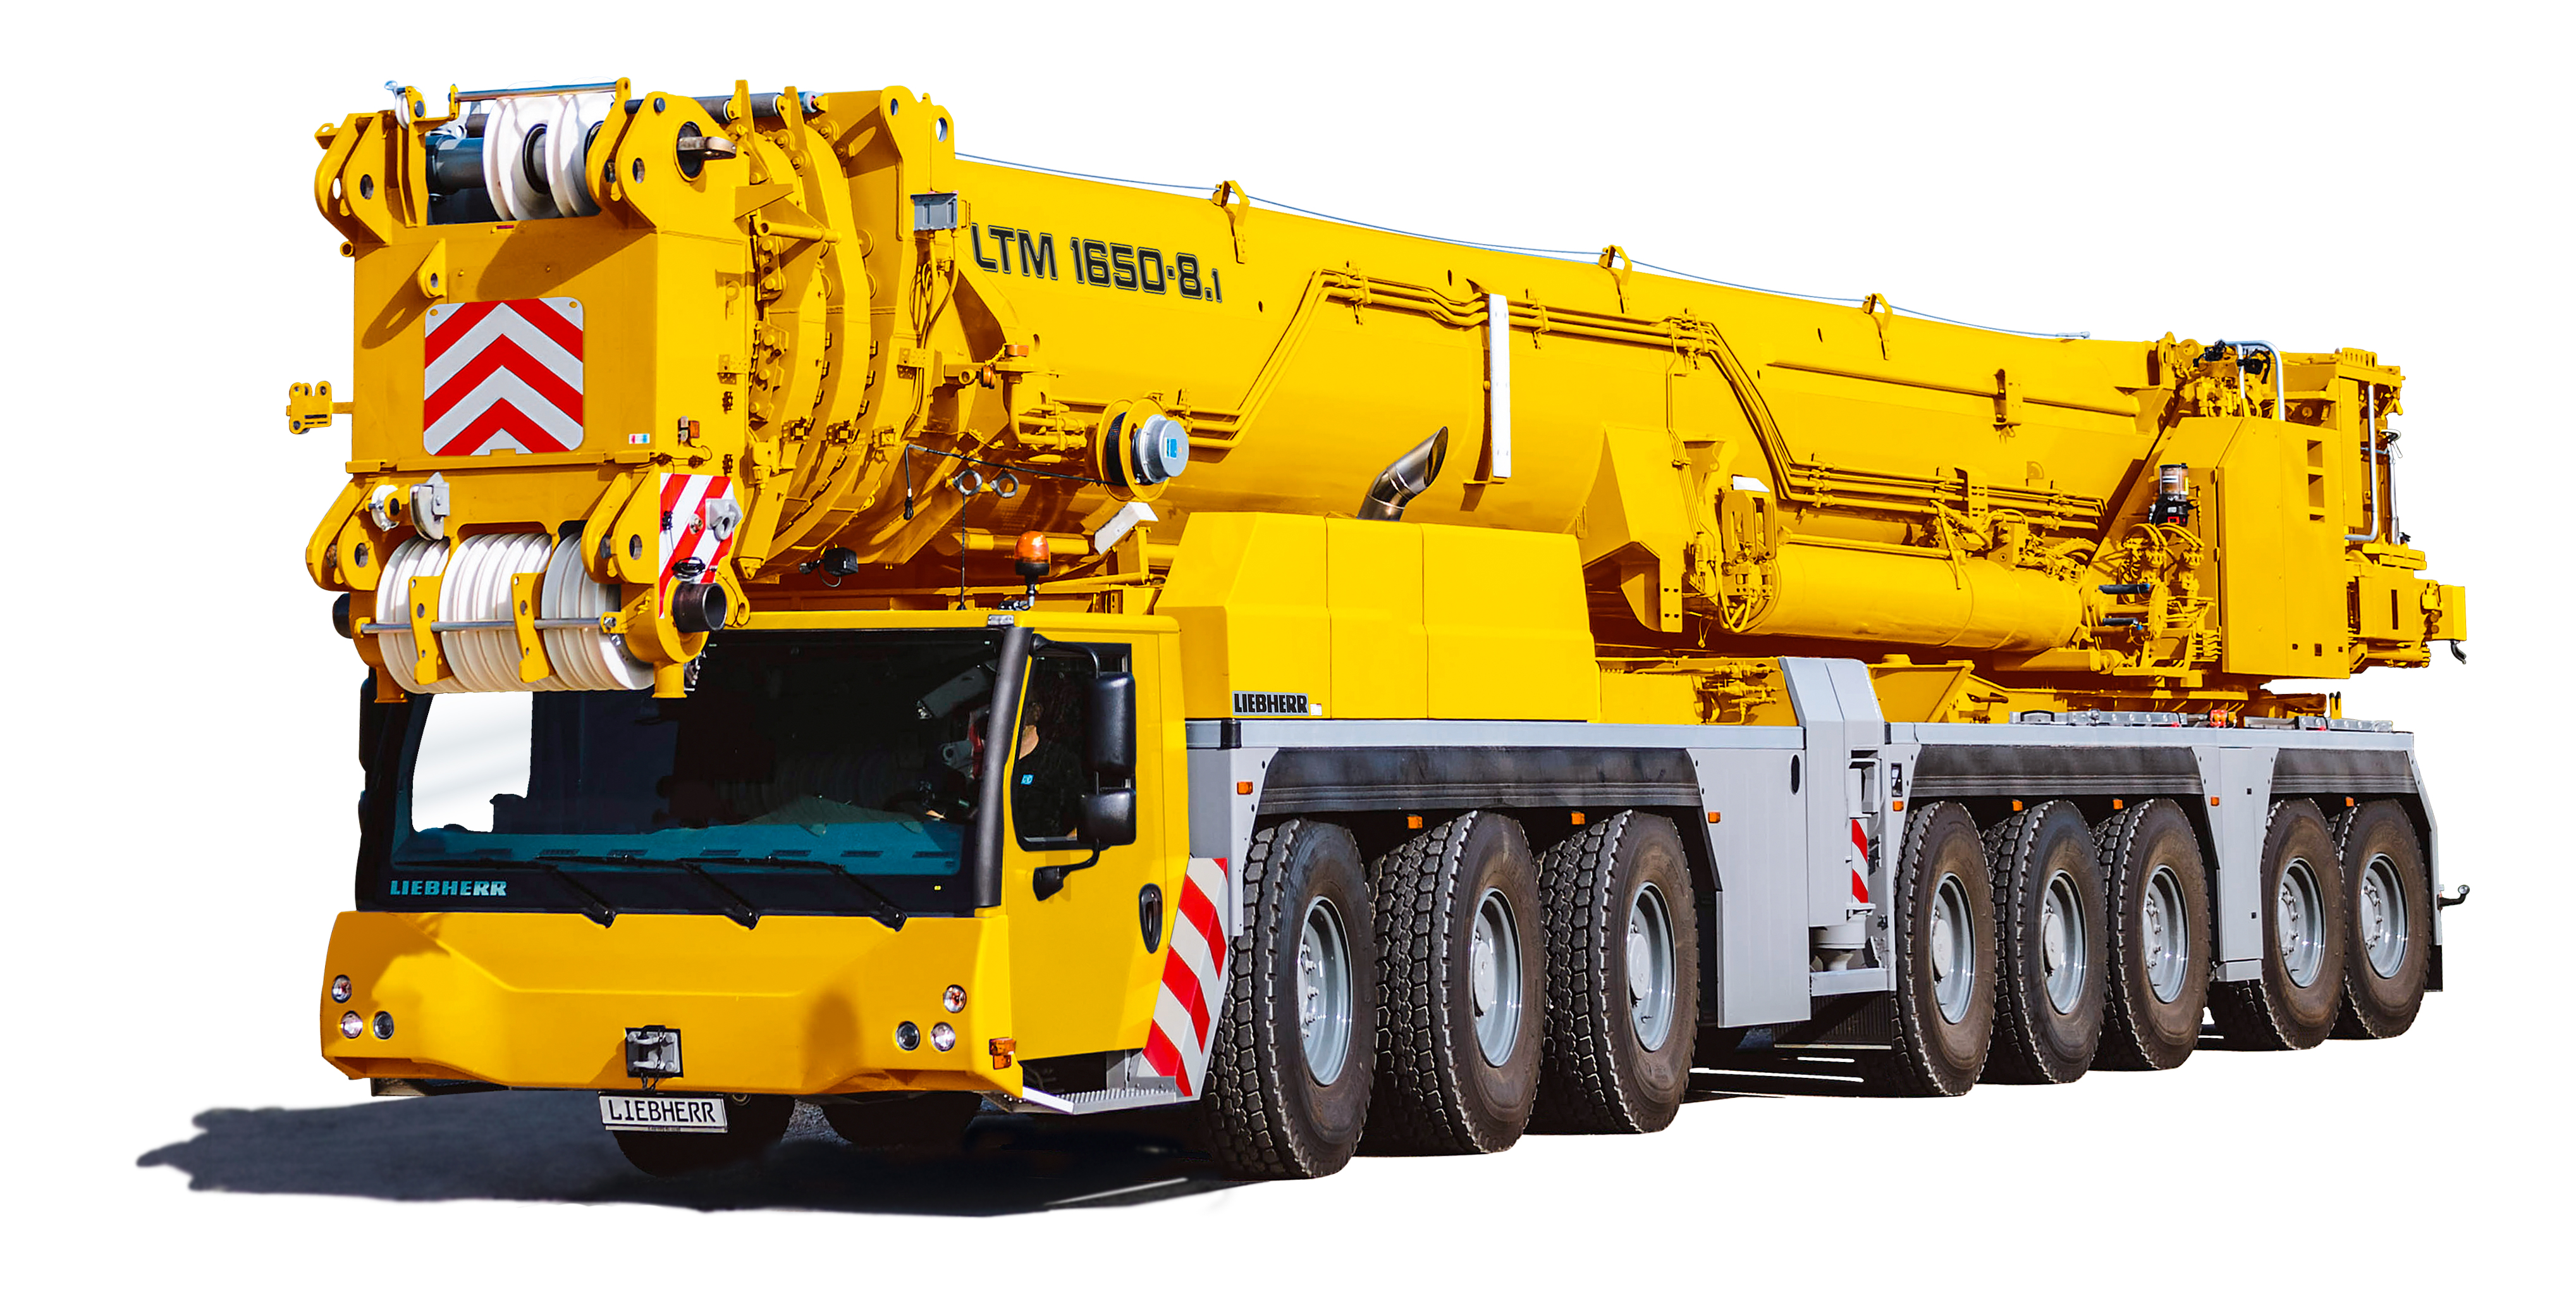 The new LTM 1650-8.1 heavy-duty crane: equipped with rope sheaves made of Lamigamid® 310 at the front of the telescopic boom and sliding elements made of Lamigamid® 319 inside the boom, Photo: Liebherr